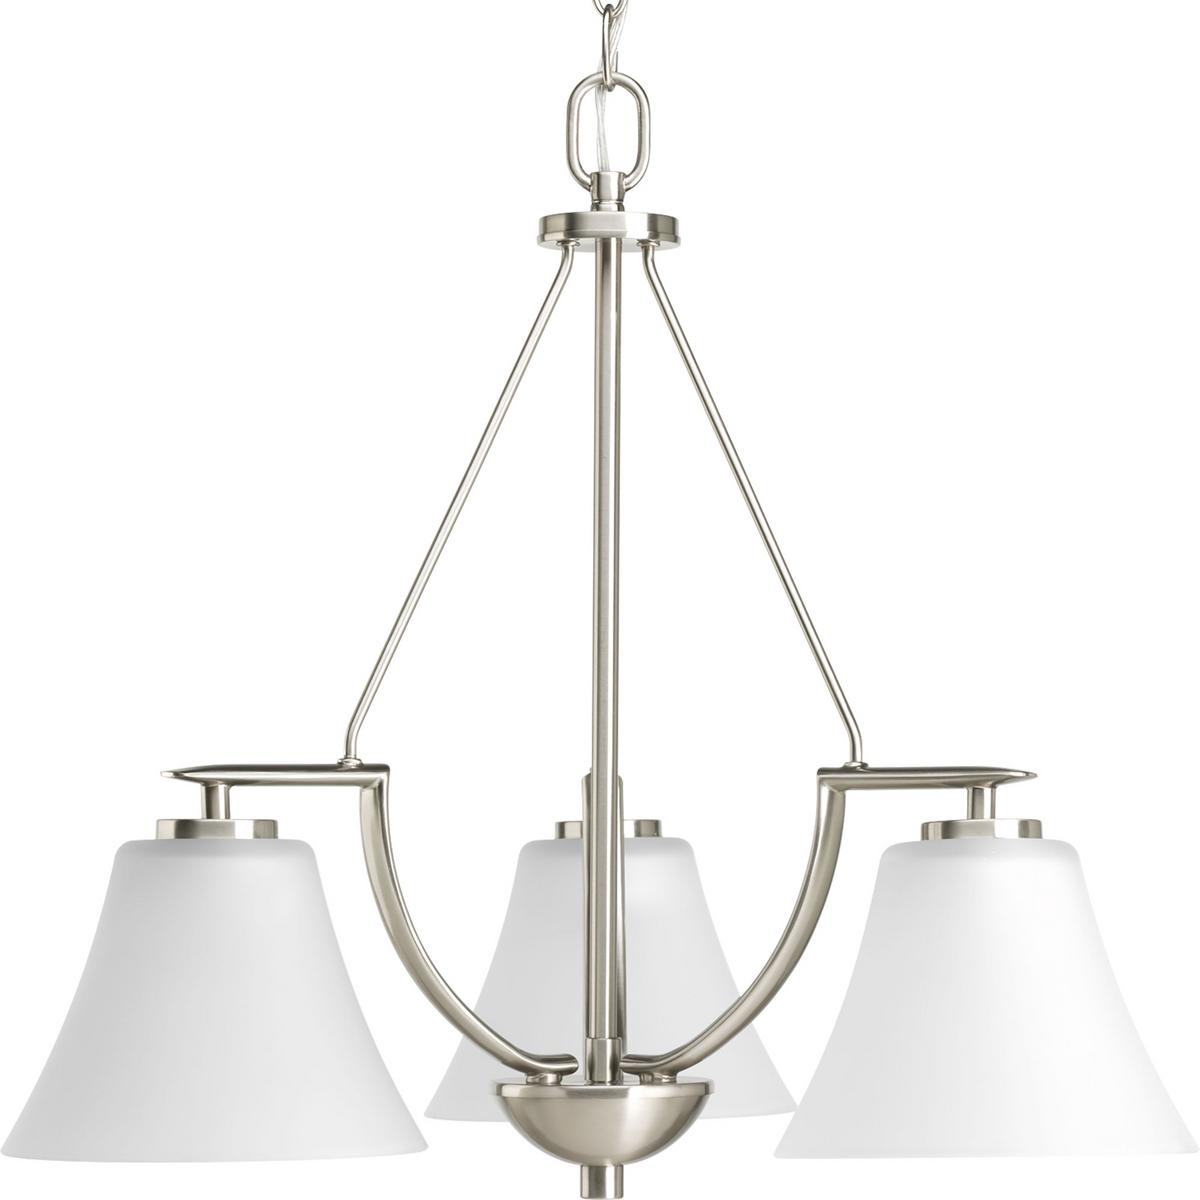 Hubbell P4621-09 Three-light down chandelier with white etched glass from the Bravo collection. Linear elements stream throughout the fixture to compose a relaxed but exotic ambiance. Generously scaled glass shades add distinction against the Brushed Nickel finish and pro